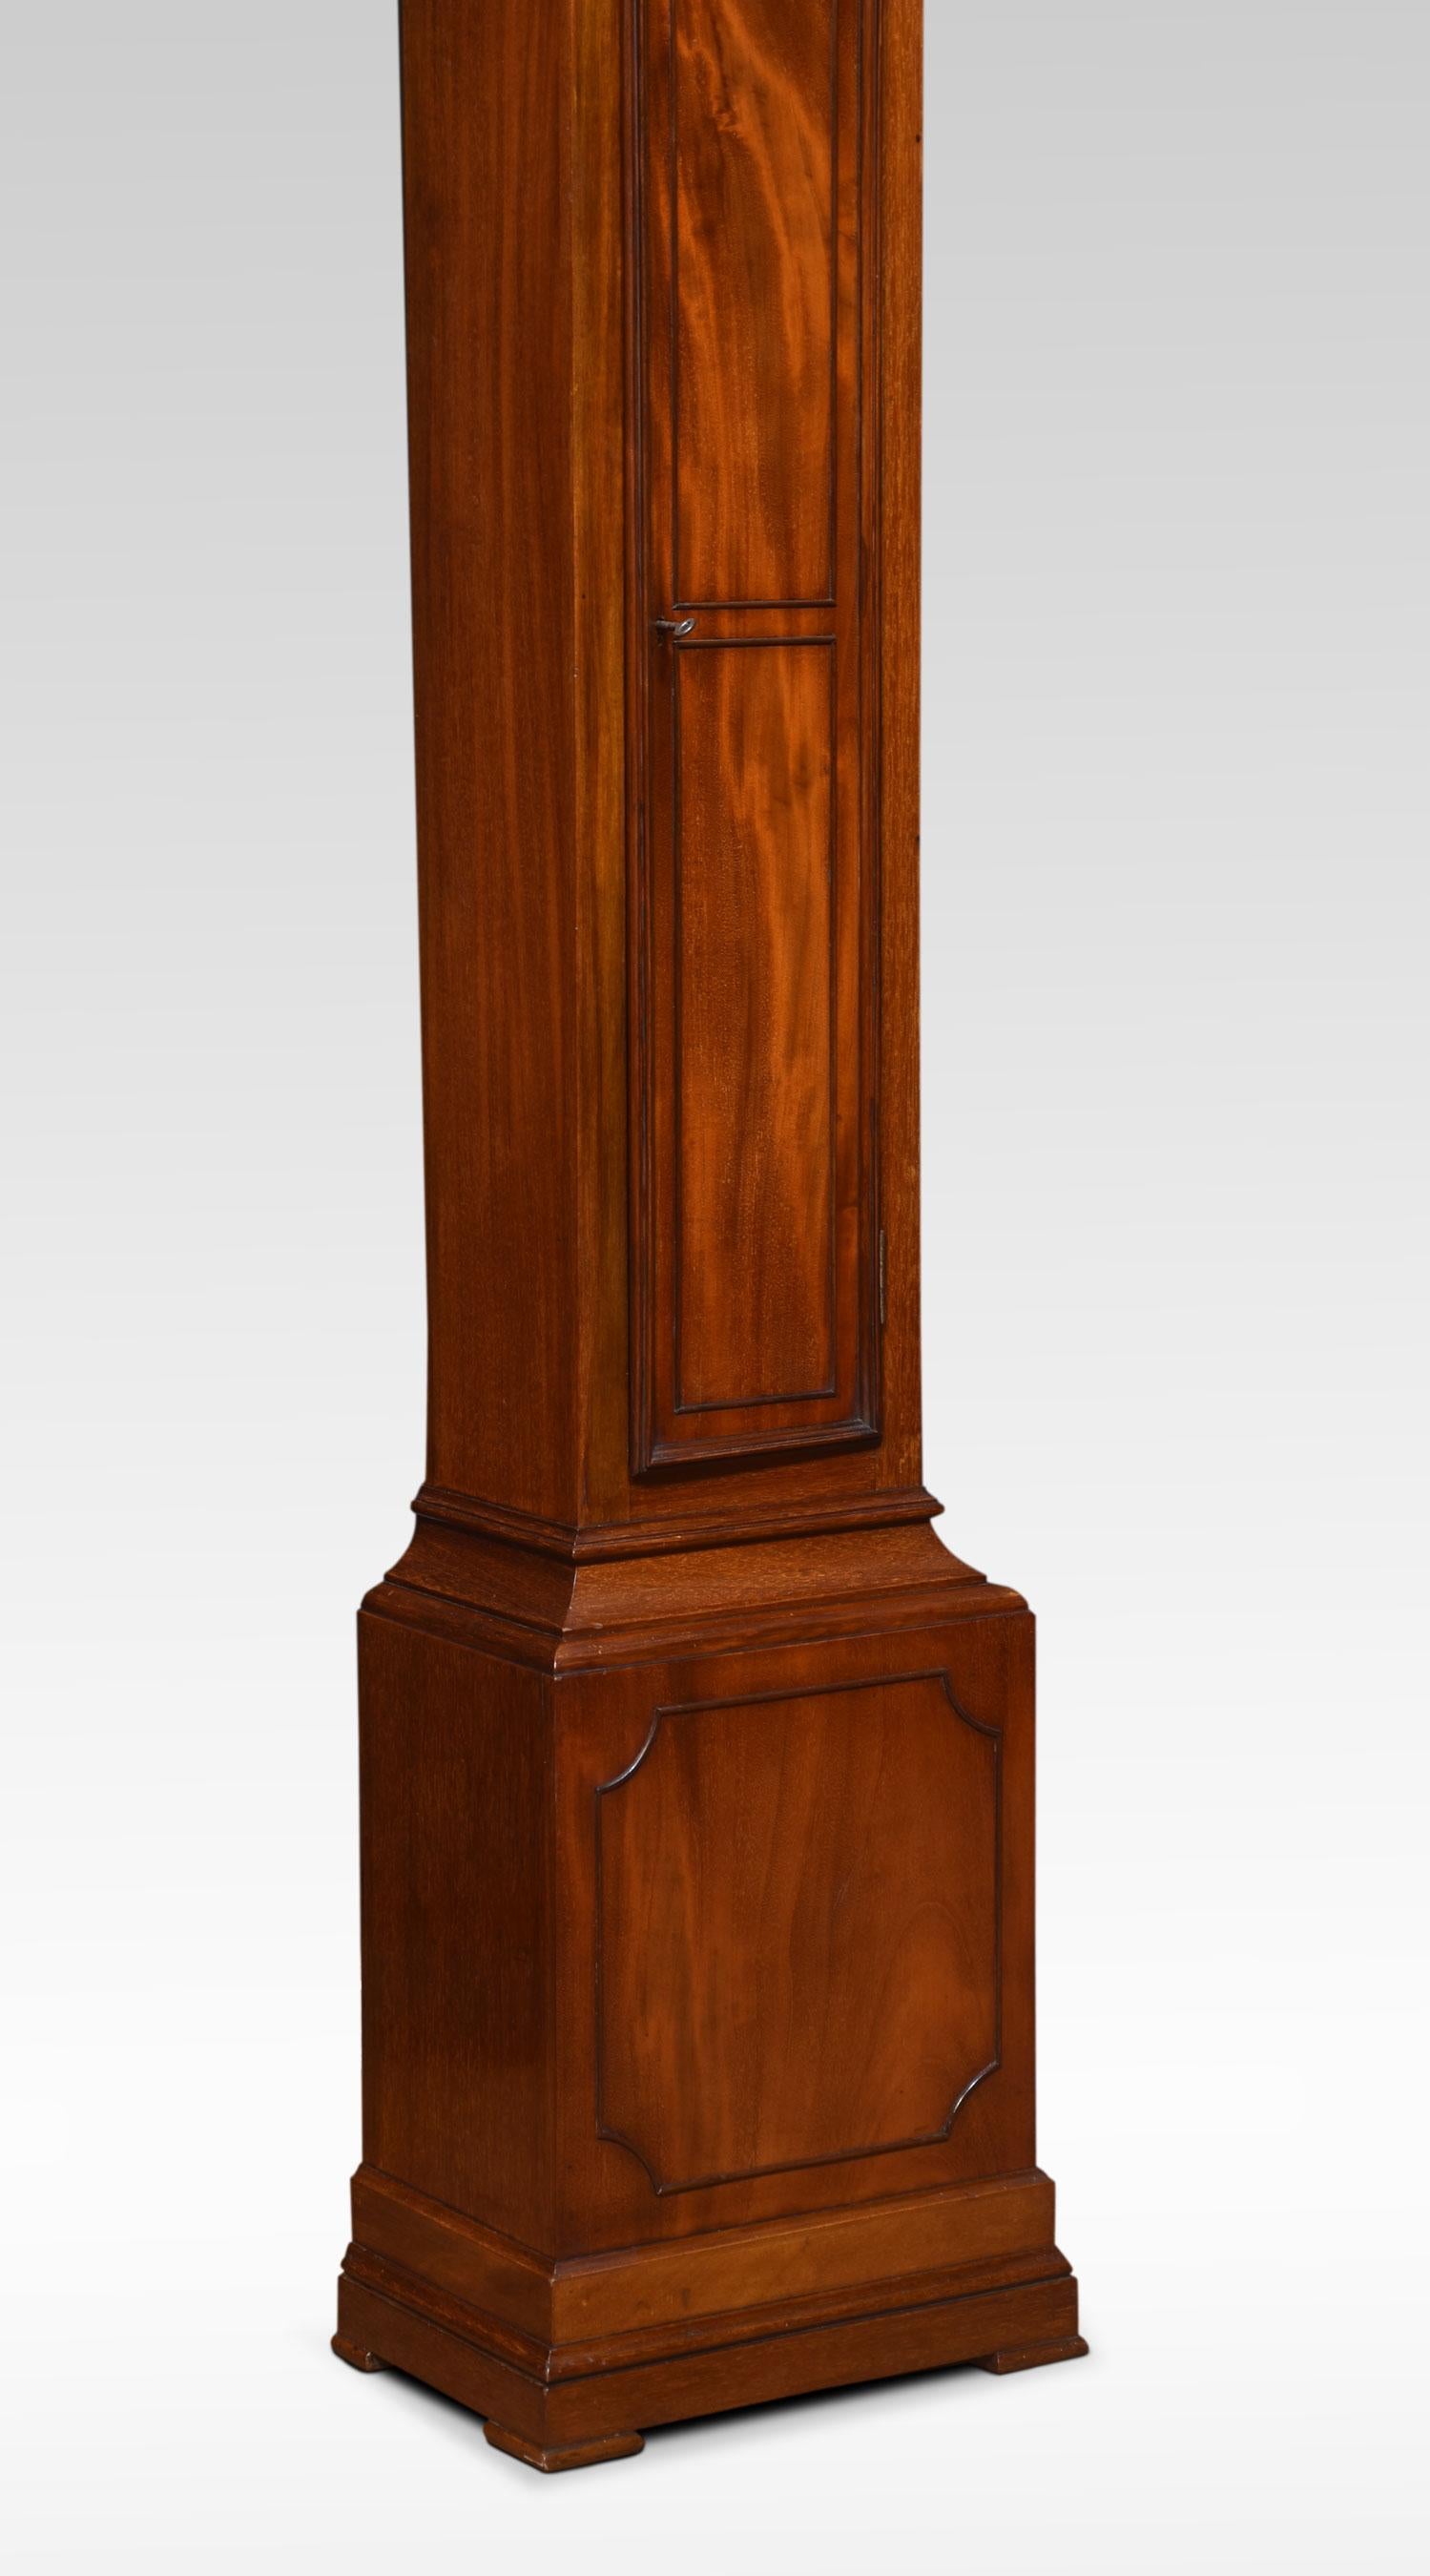 Mahogany cased grandmother clock, the moulded hood to the brass dial engraved with gilt-metal Roman numerals and decorated foliated face. The eight-day weight-driven movement chiming on a gong. The mahogany case with long rectangular door above